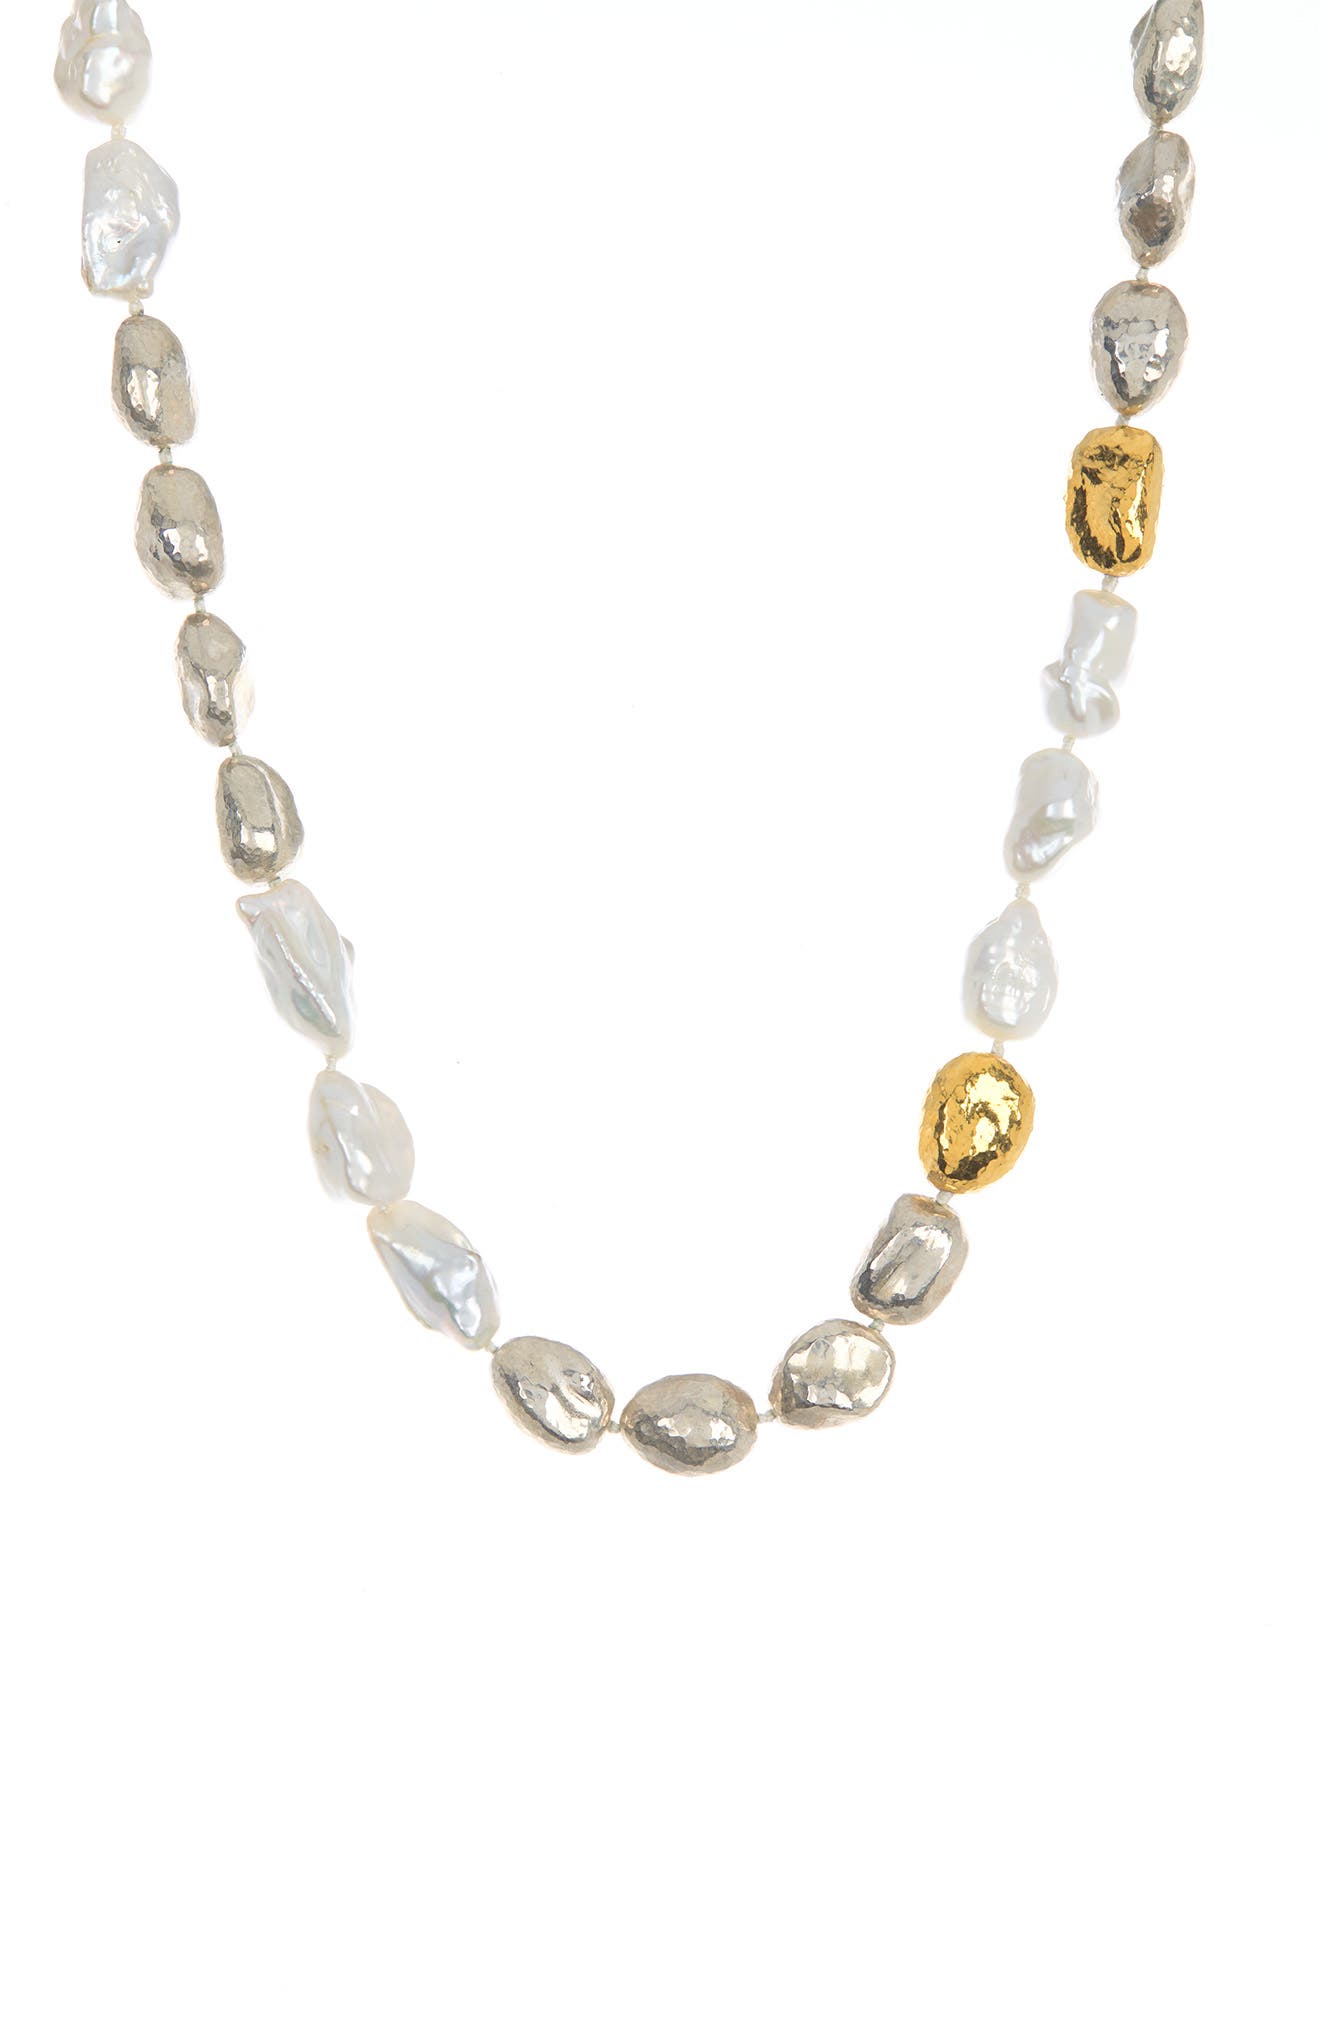 Gurhan Spell 24k Gold Plated Sterling Silver Hammered Nugget White Keshi Pearl Short Necklace